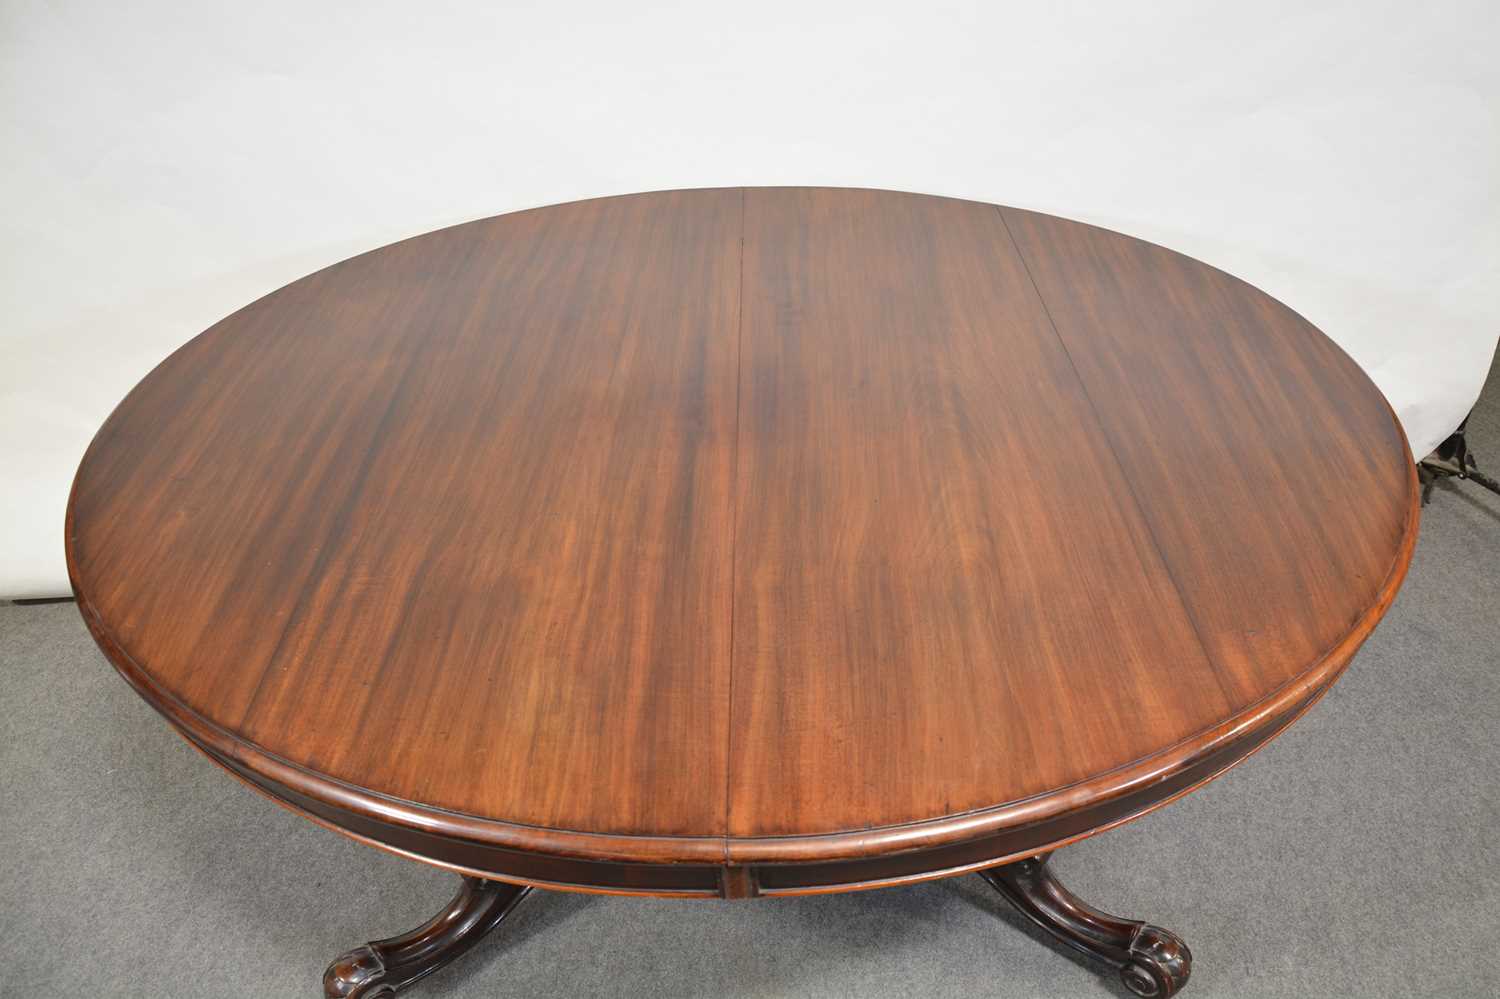 Victorian mahogany extending dining table, oval top with moulded edge, 156x121cm, one 53cm leaf, - Image 2 of 2